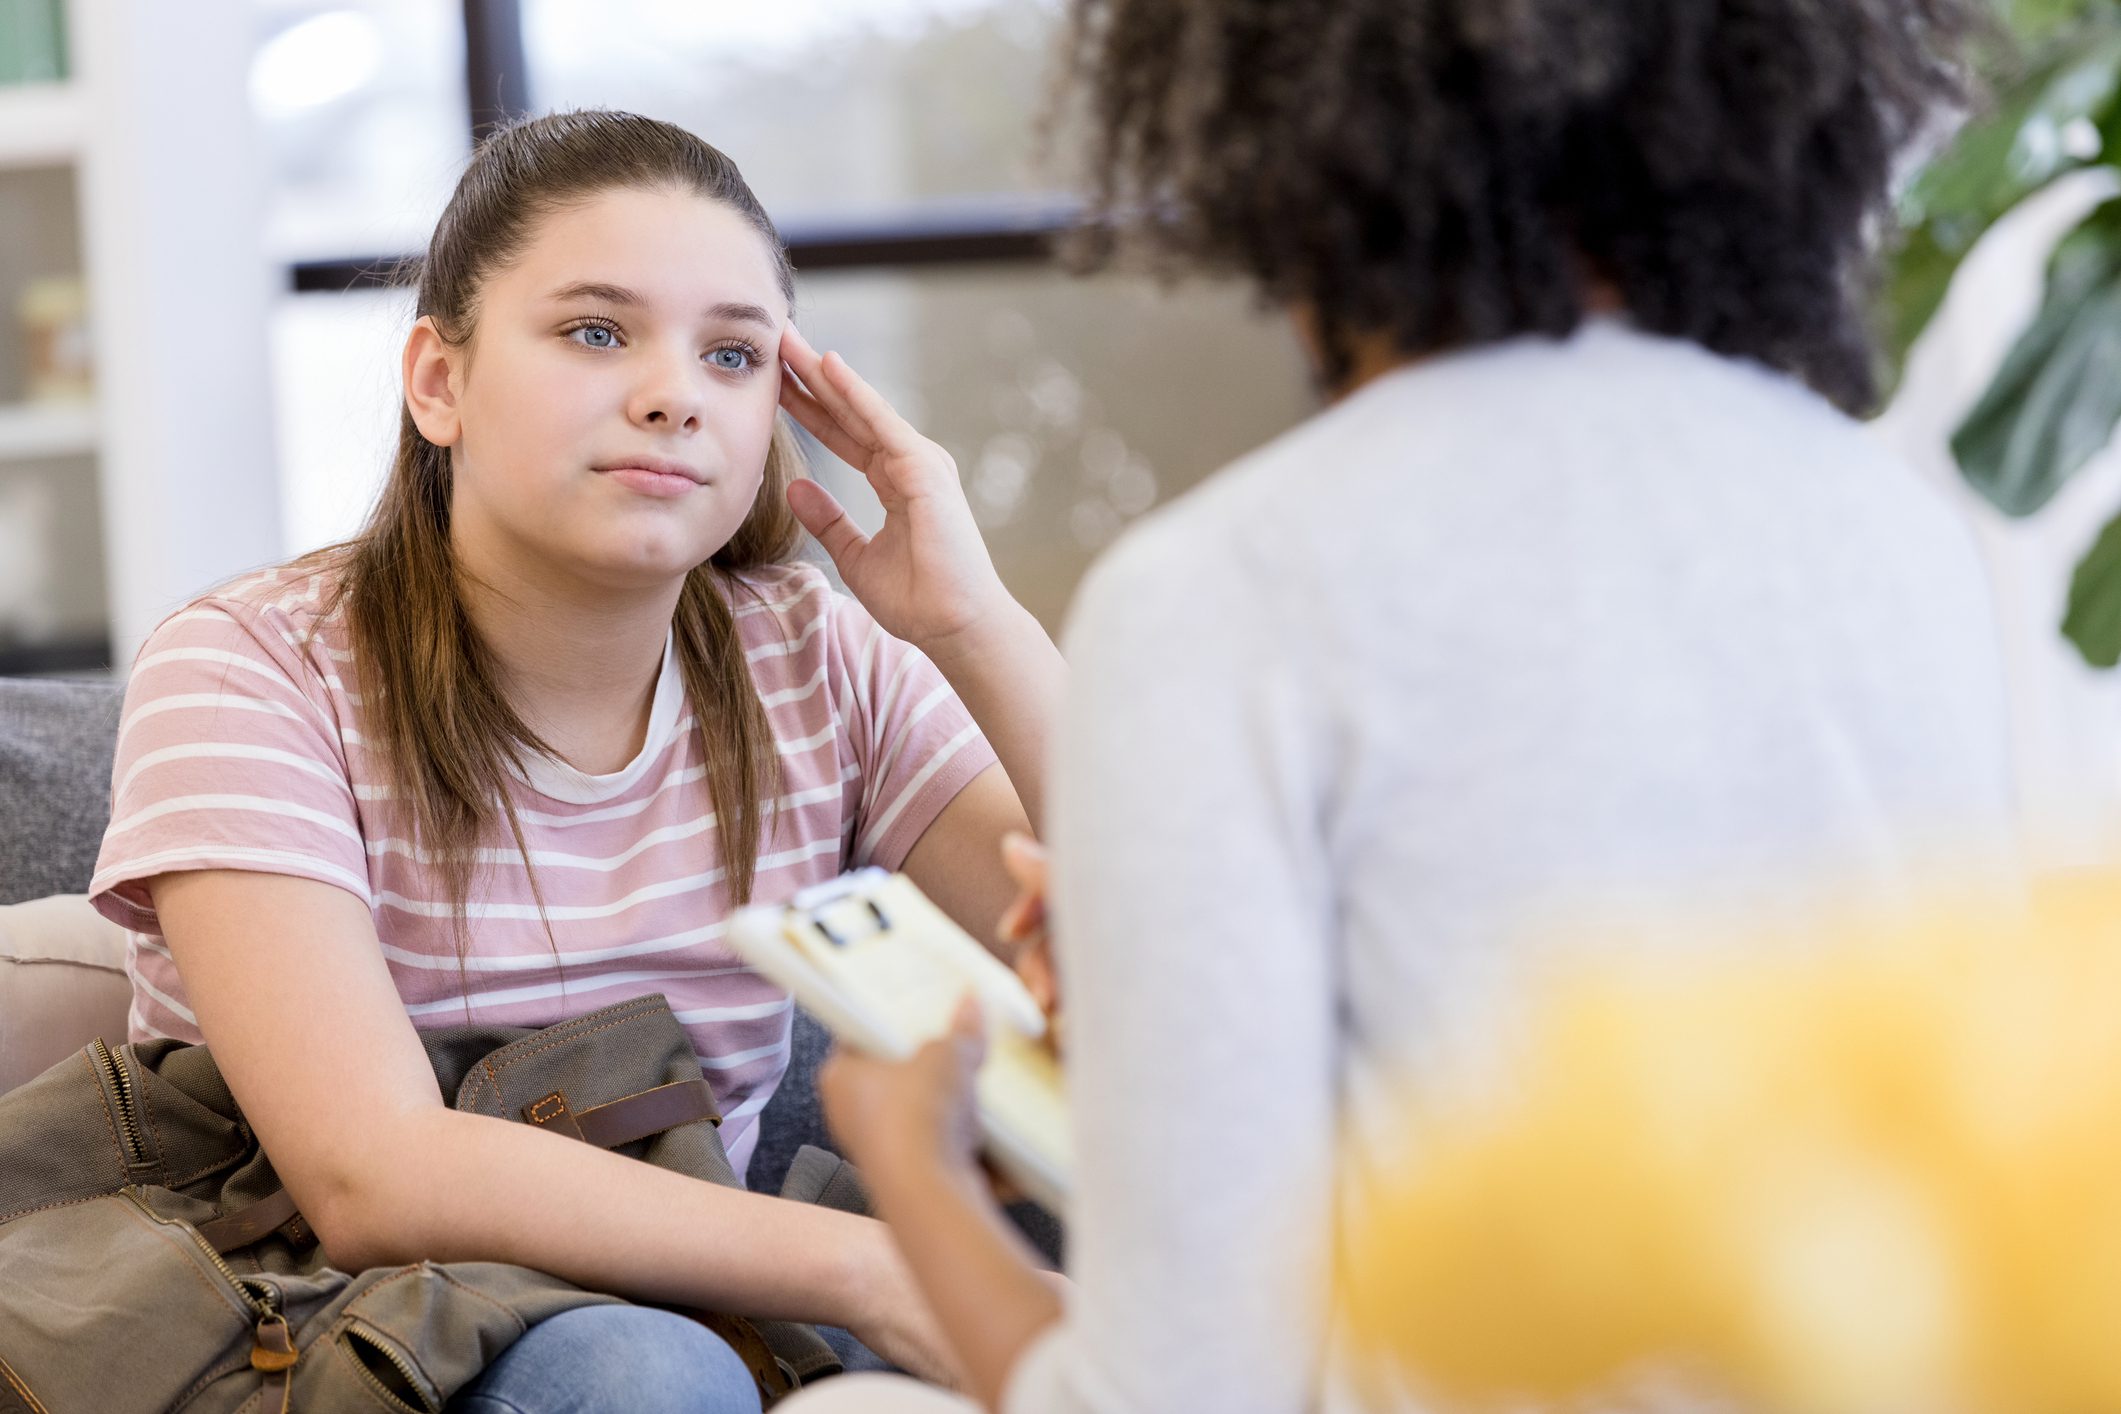 Teen girl upset when confronted by unrecognizable counselor